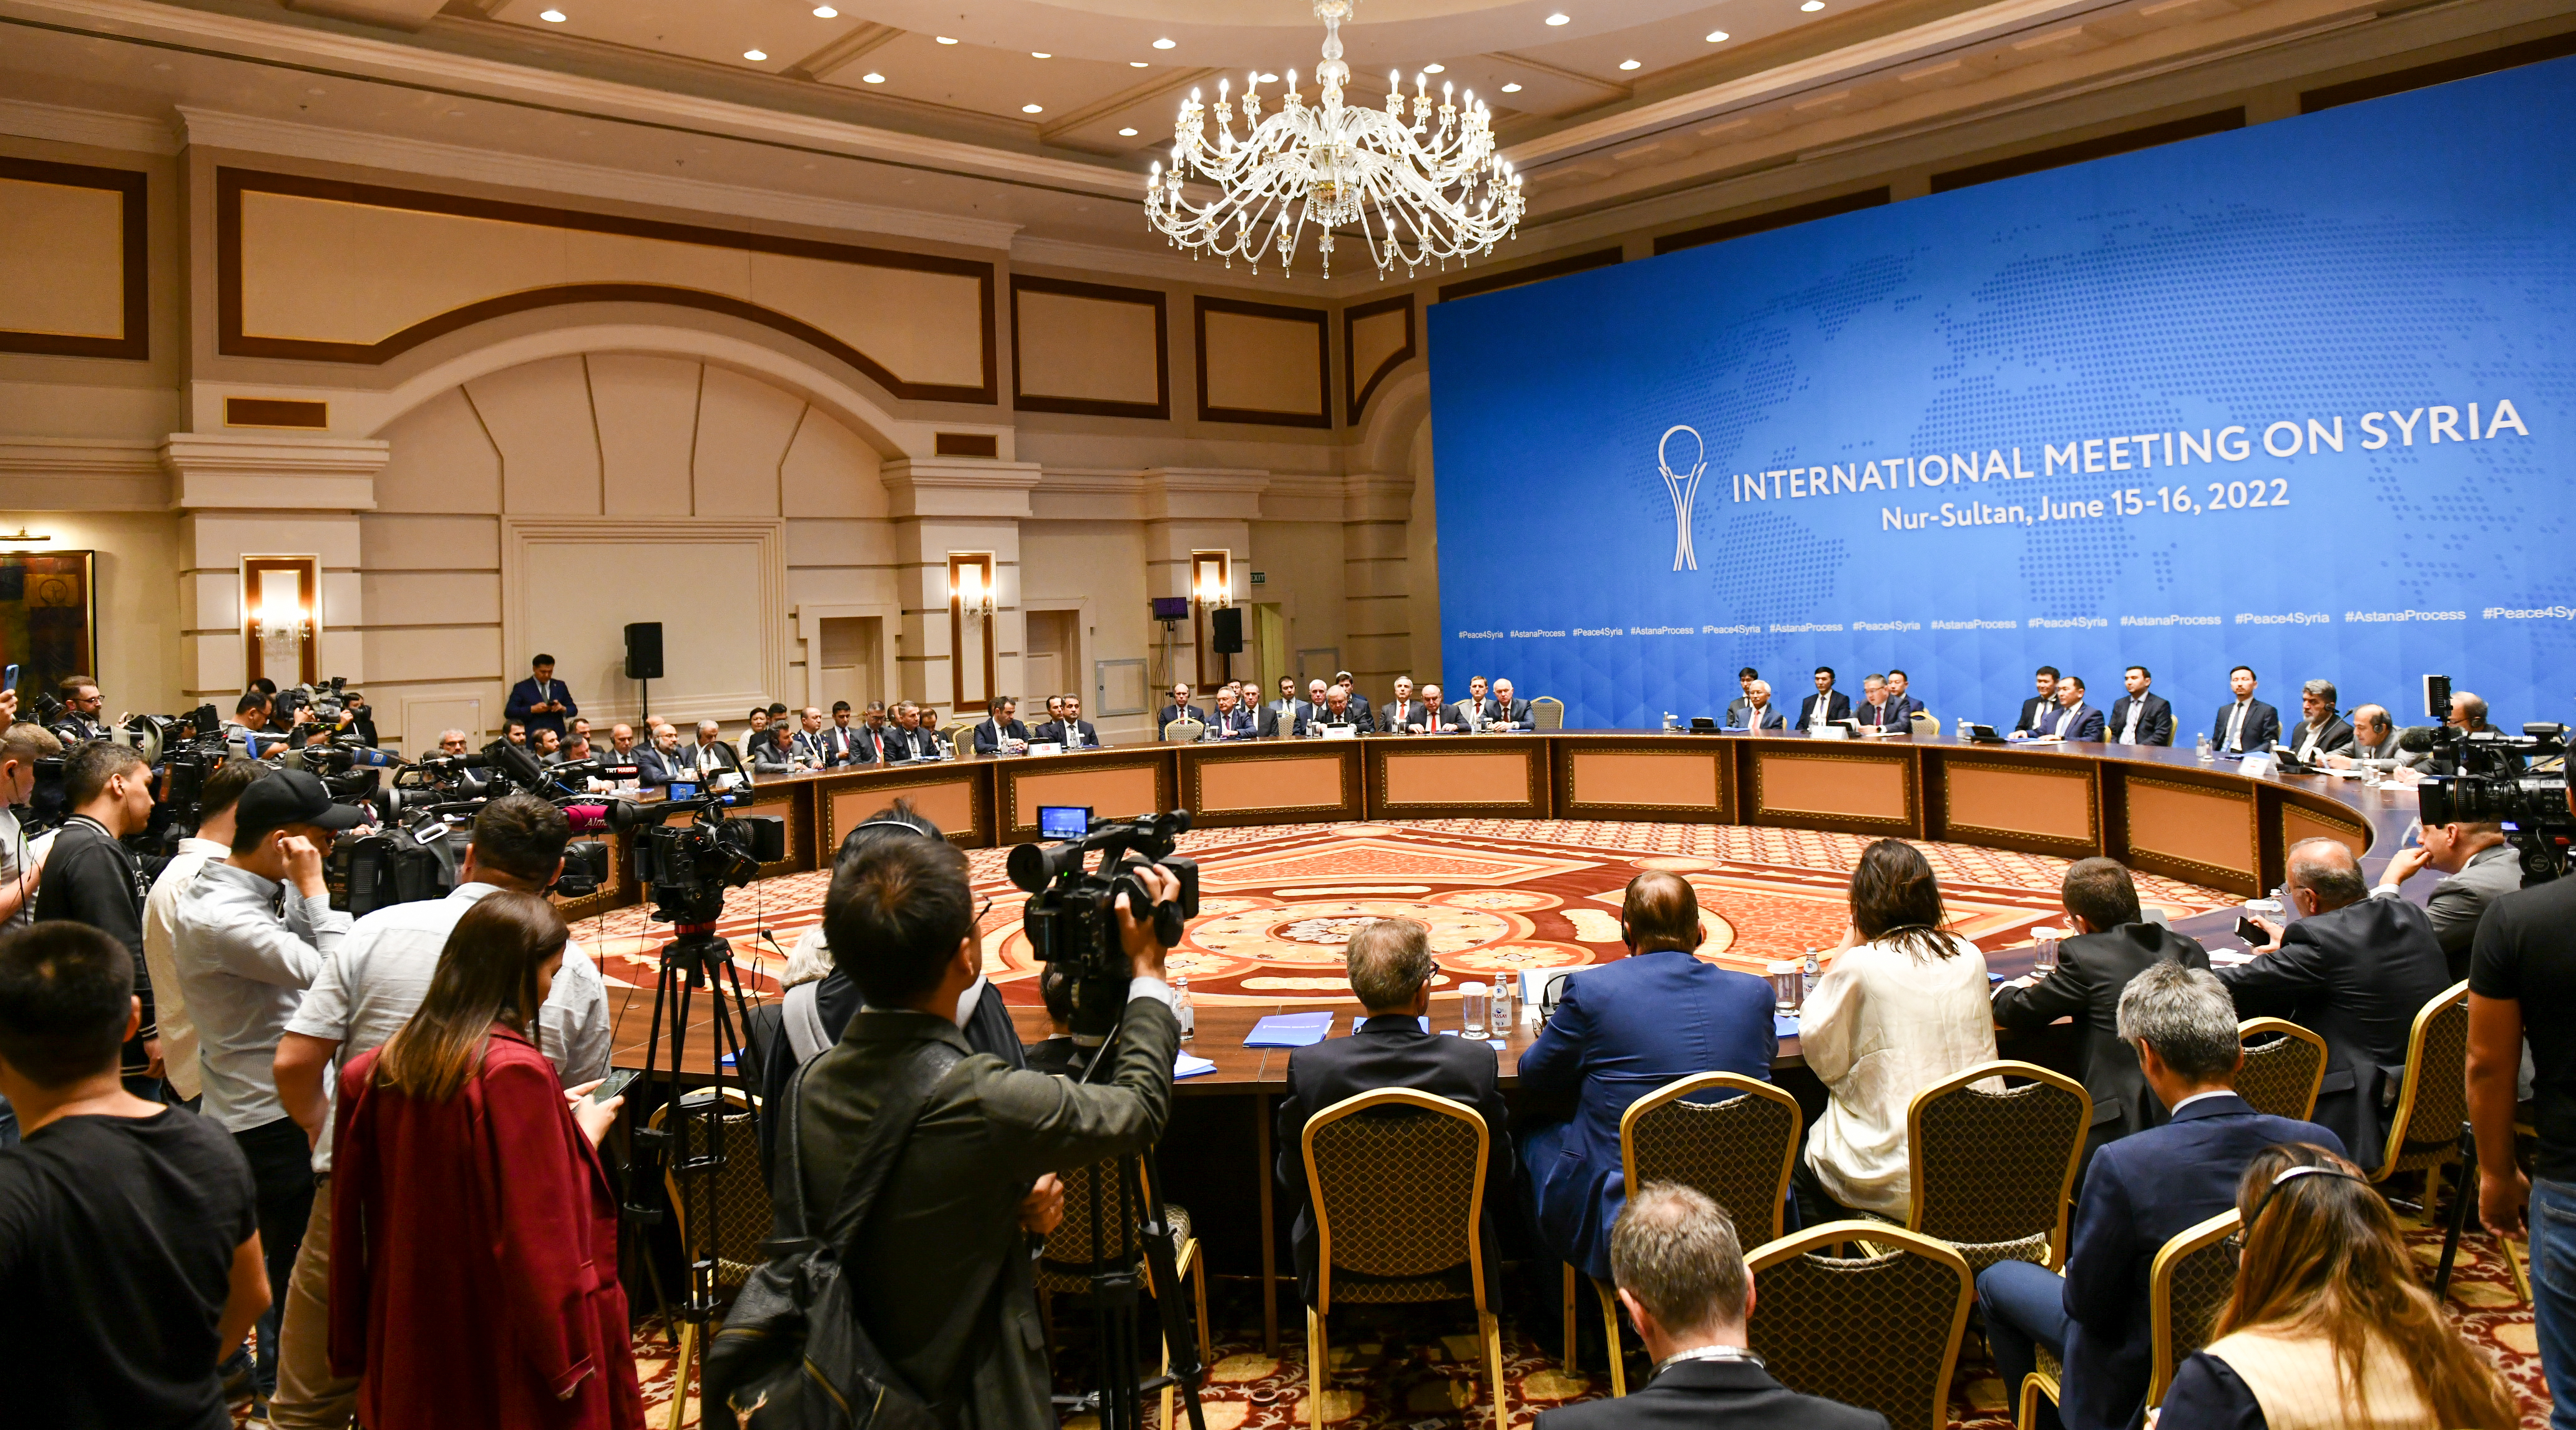 Joint Statement by the Representatives of Iran, Russia and Türkiye on the 18th International Meeting on Syria in the Astana Format